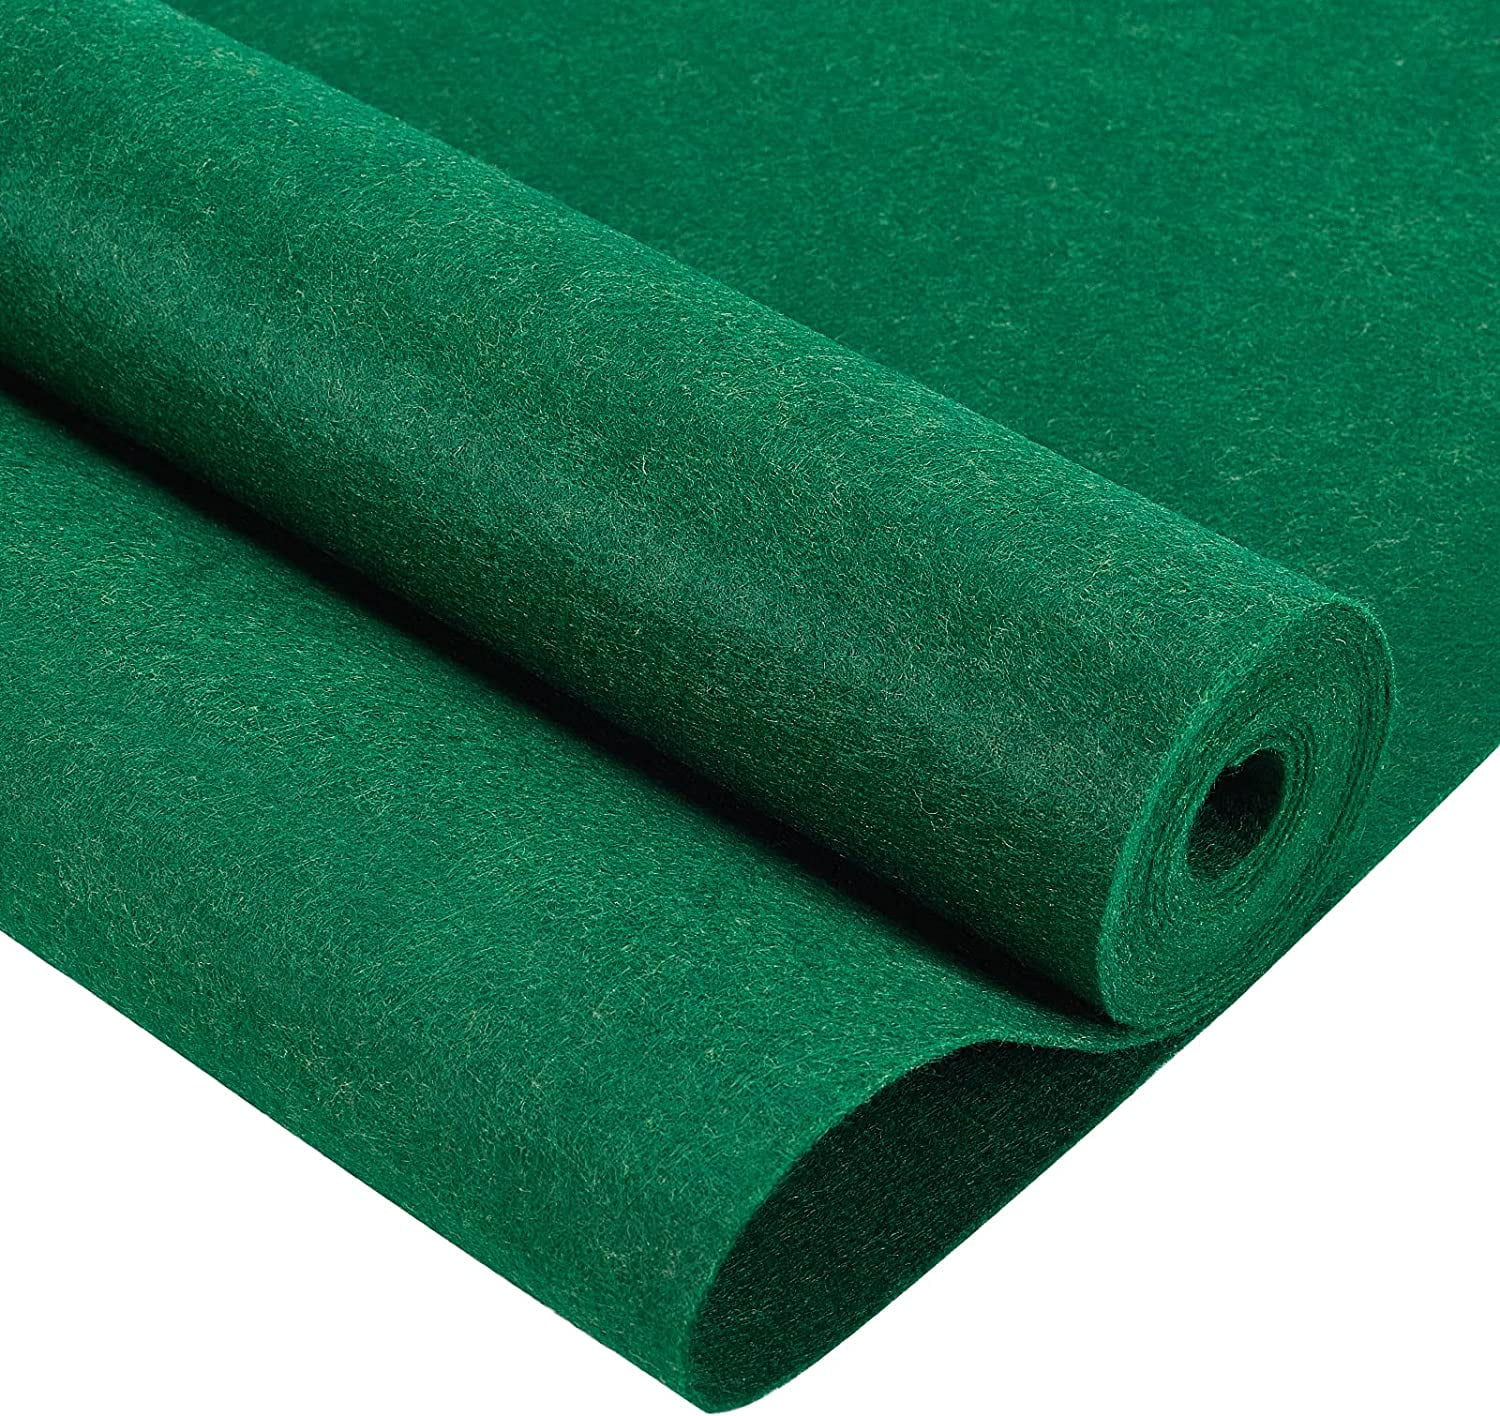 10FT 15.75 Inch Wide Green Felt Fabric Sheet St Patrick's Day Nonwoven Felt  Roll Padding Felt Fabric for Cushion DIY Craft Patchwork Sewing 0.9mm